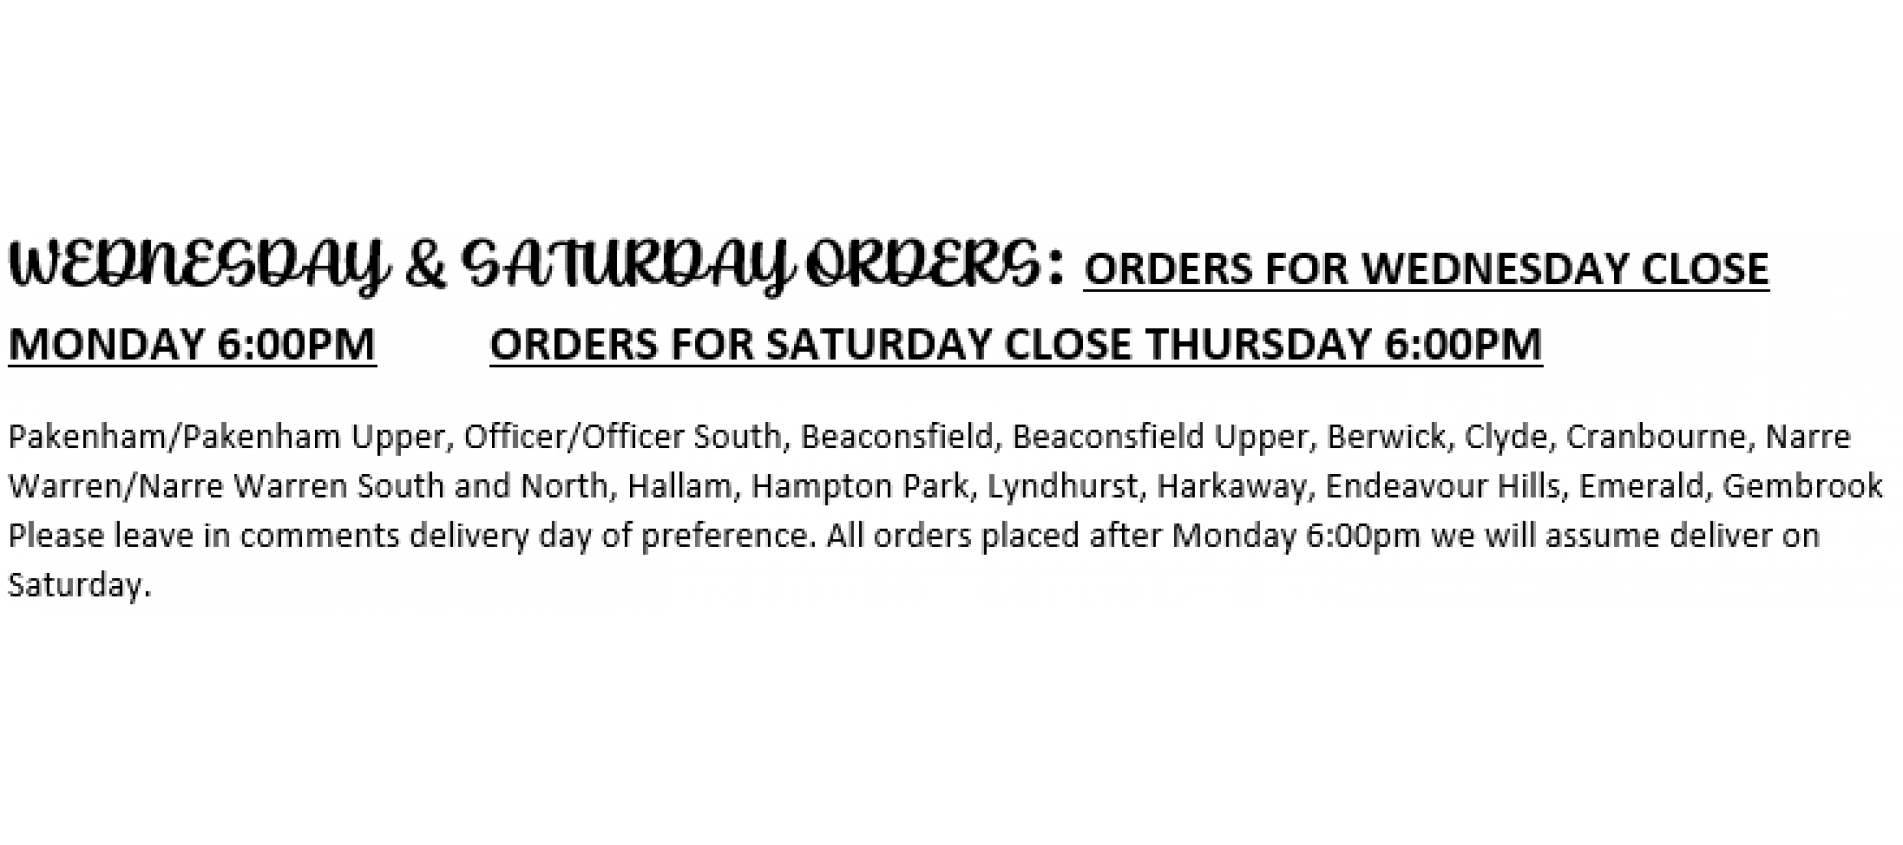 Wednesday and Saturday orders